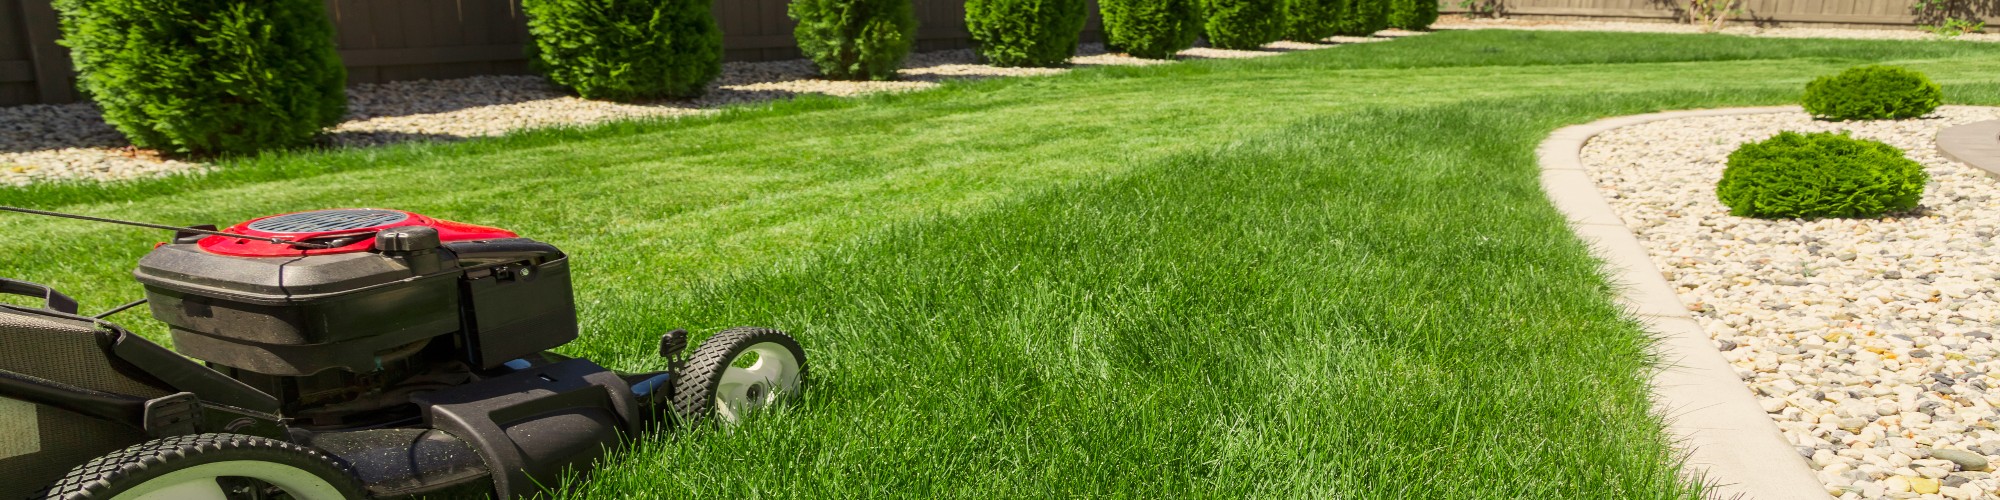 Green Means Gorgeous with Lawn Care in Kent from the Experts